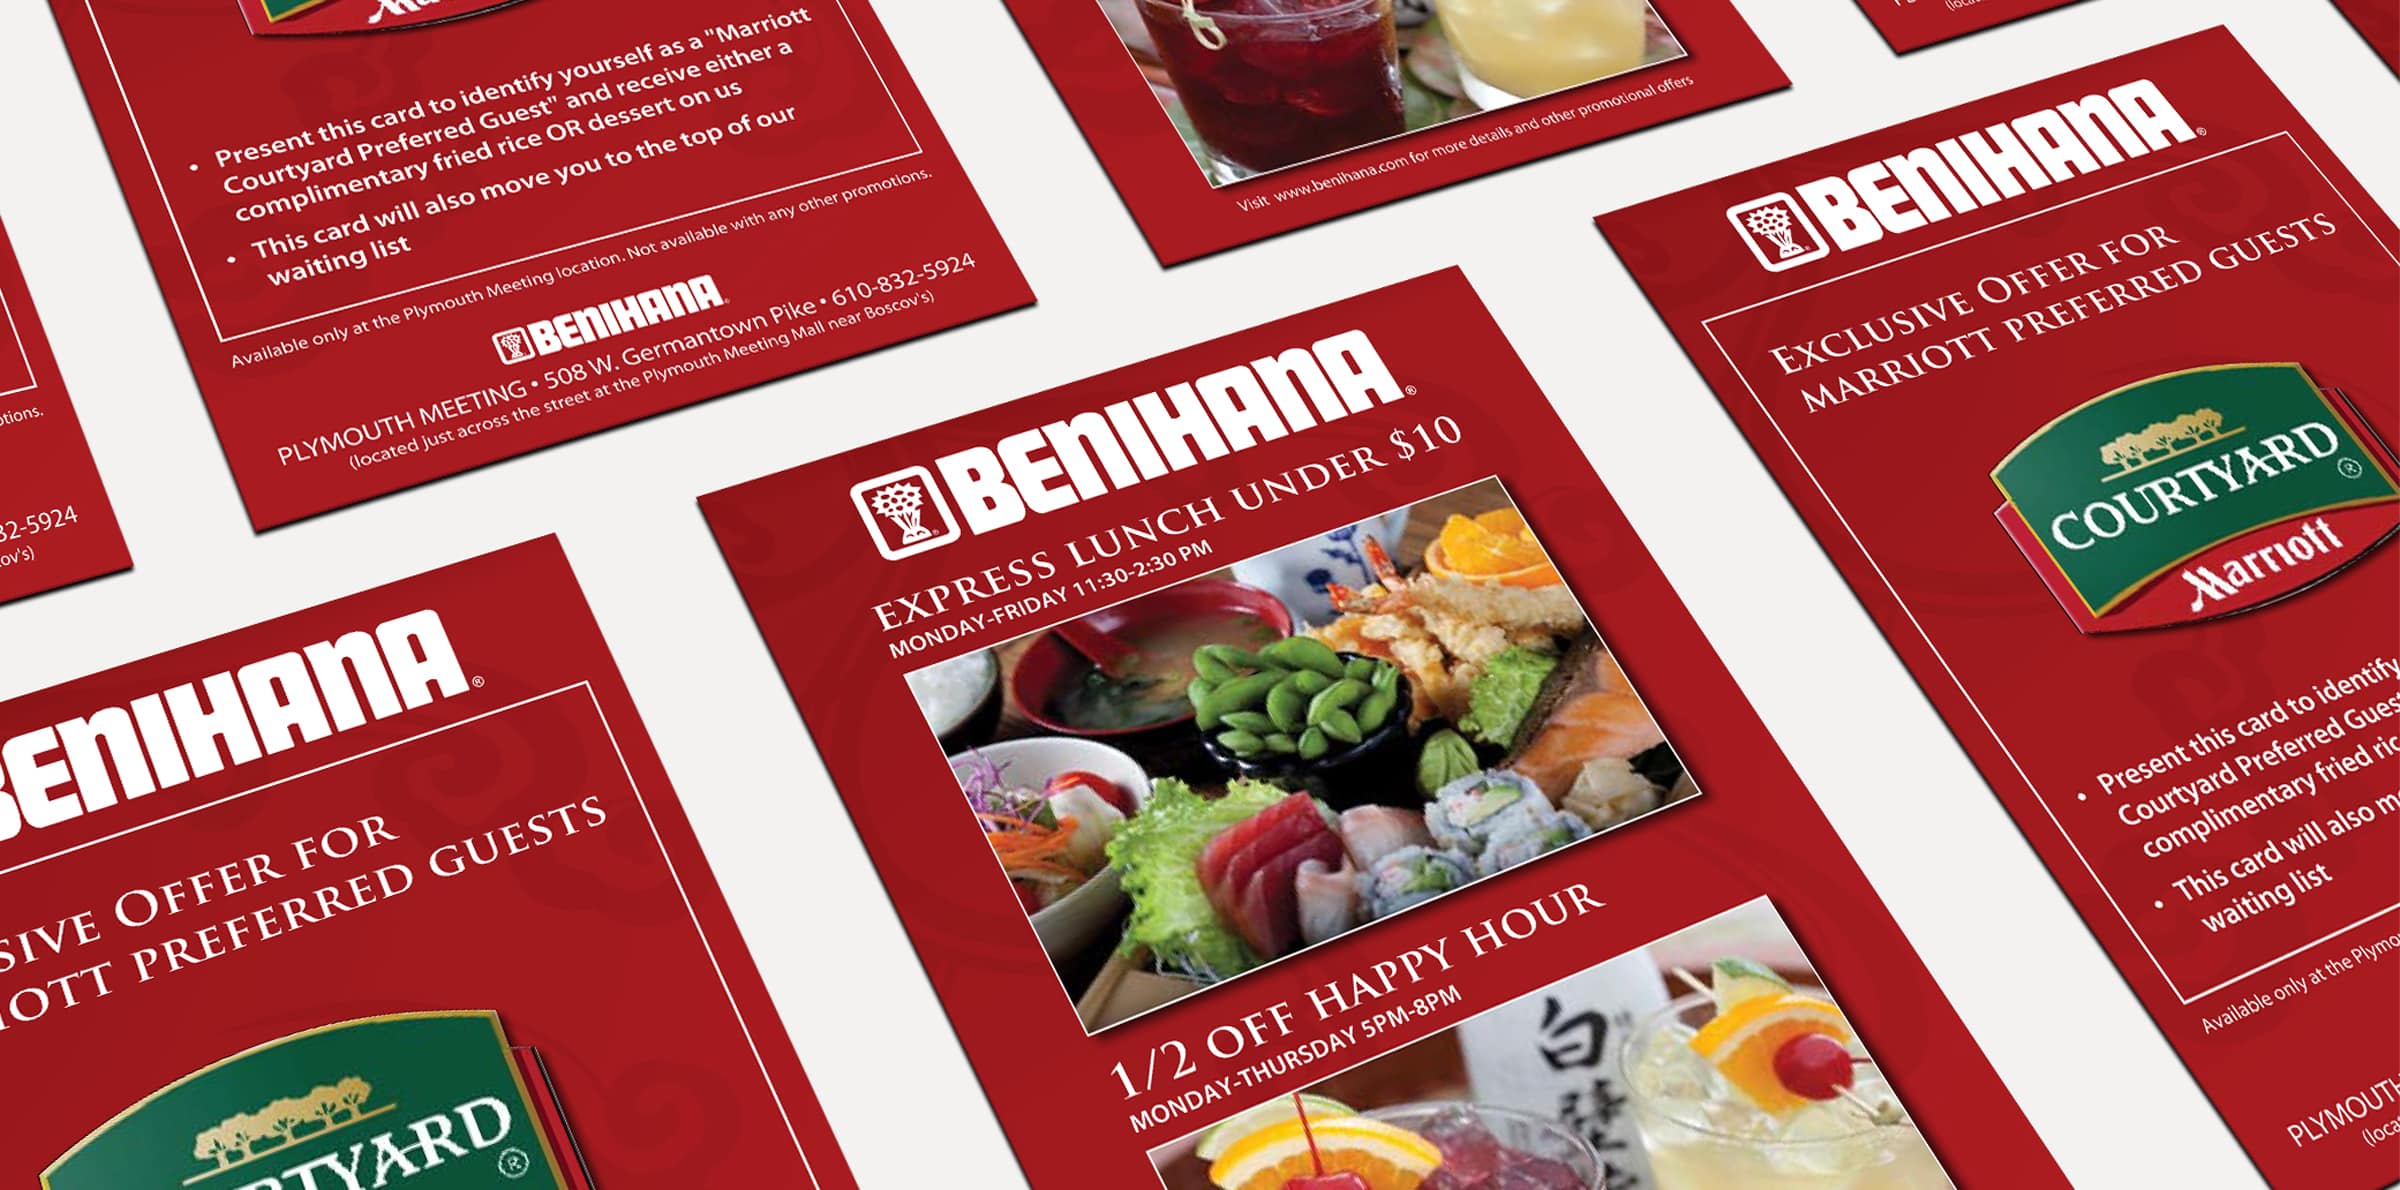 Benihana food brand design flyers for Marriott Preferred Guests arranged in diagonal rows against white backdrop.